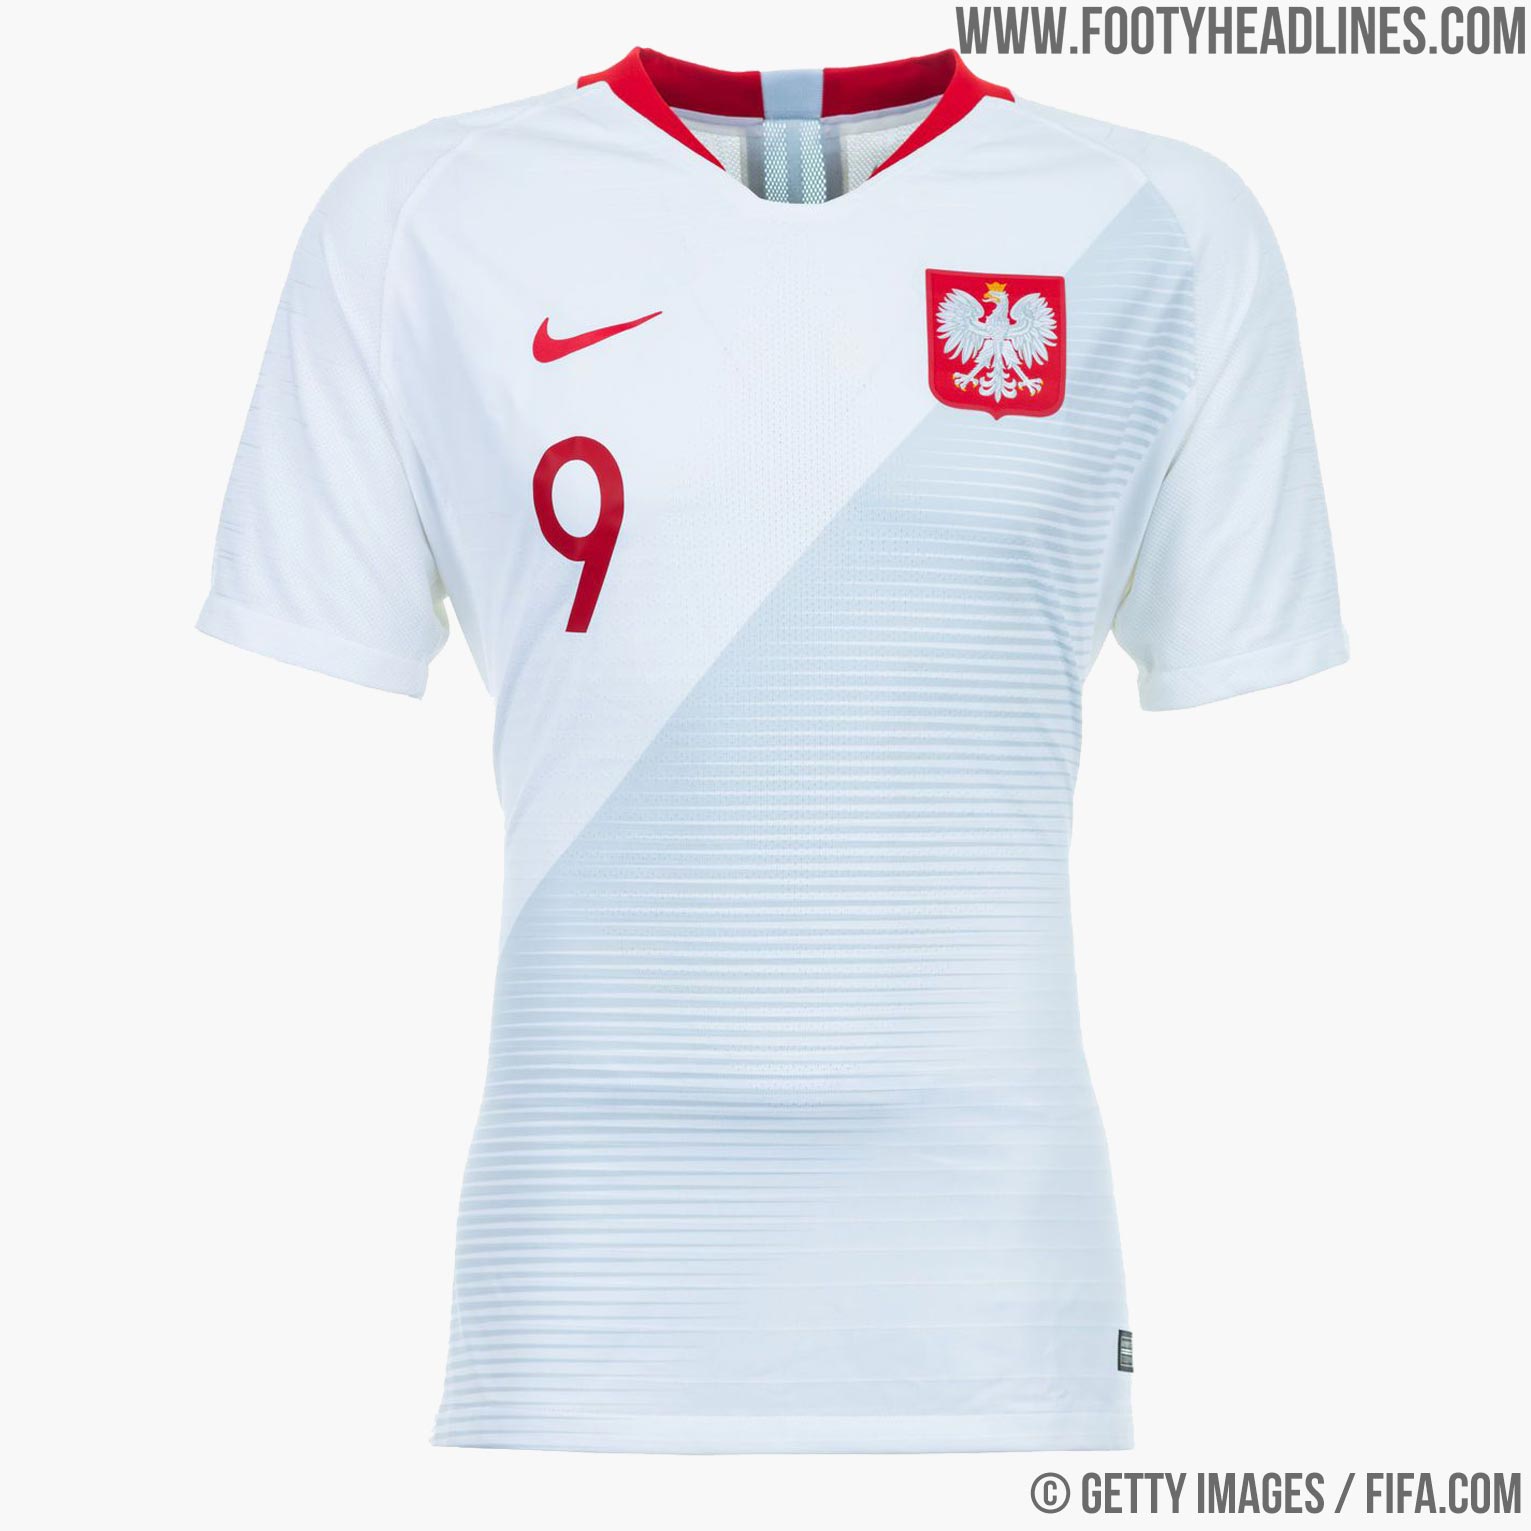 Here Are All 32 2018 World Cup Home Kits - Footy Headlines